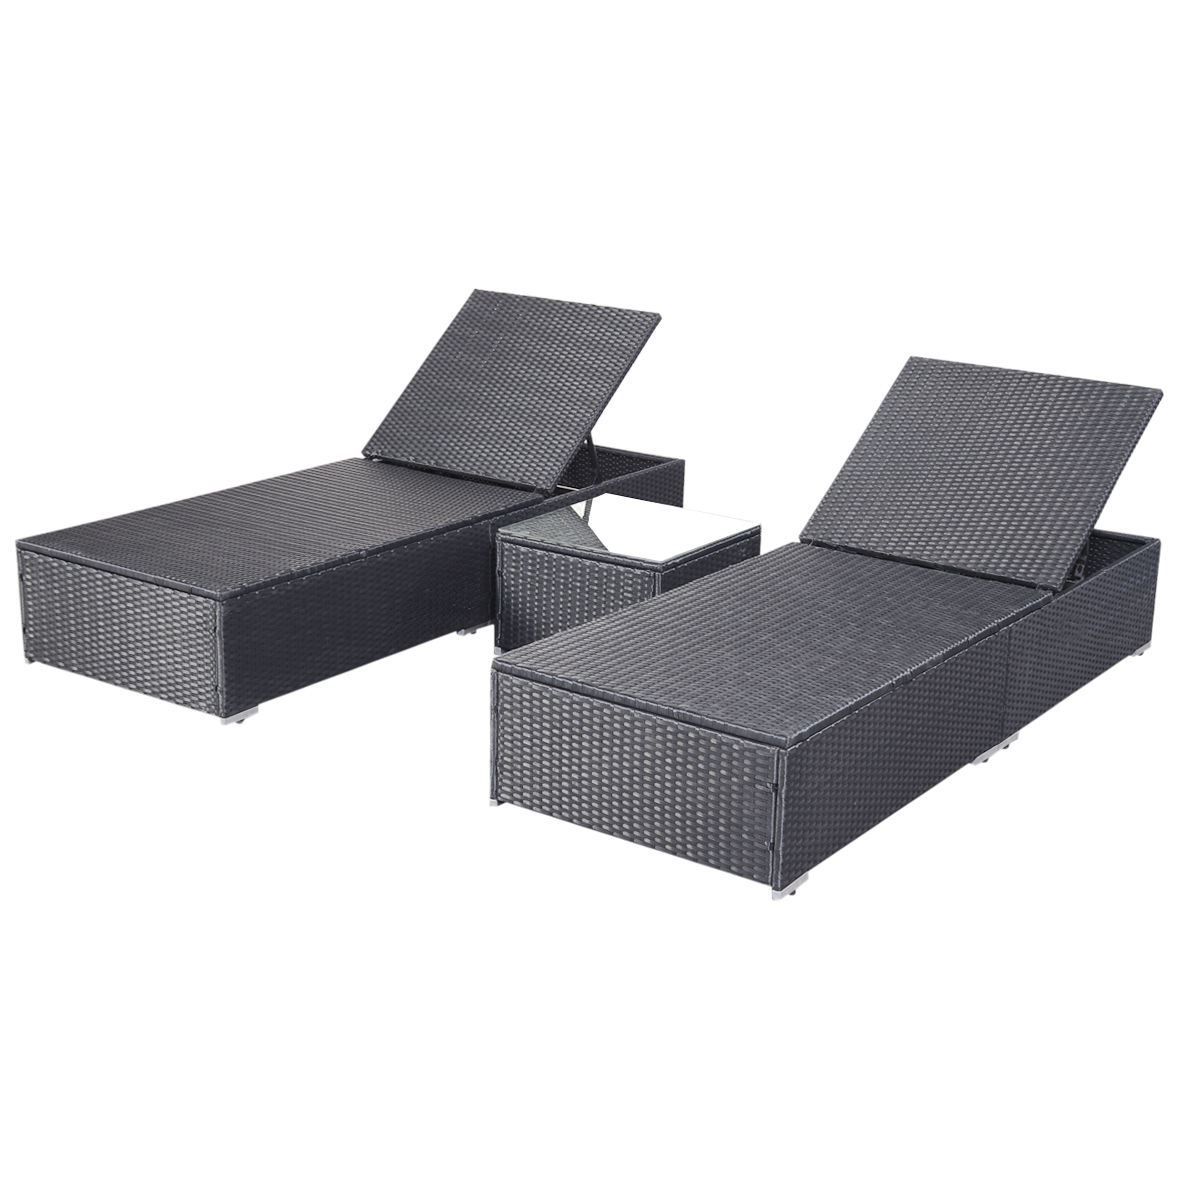 Outdoor Chaise Lounge Chairs Throughout Preferred Gym Equipment (View 13 of 15)